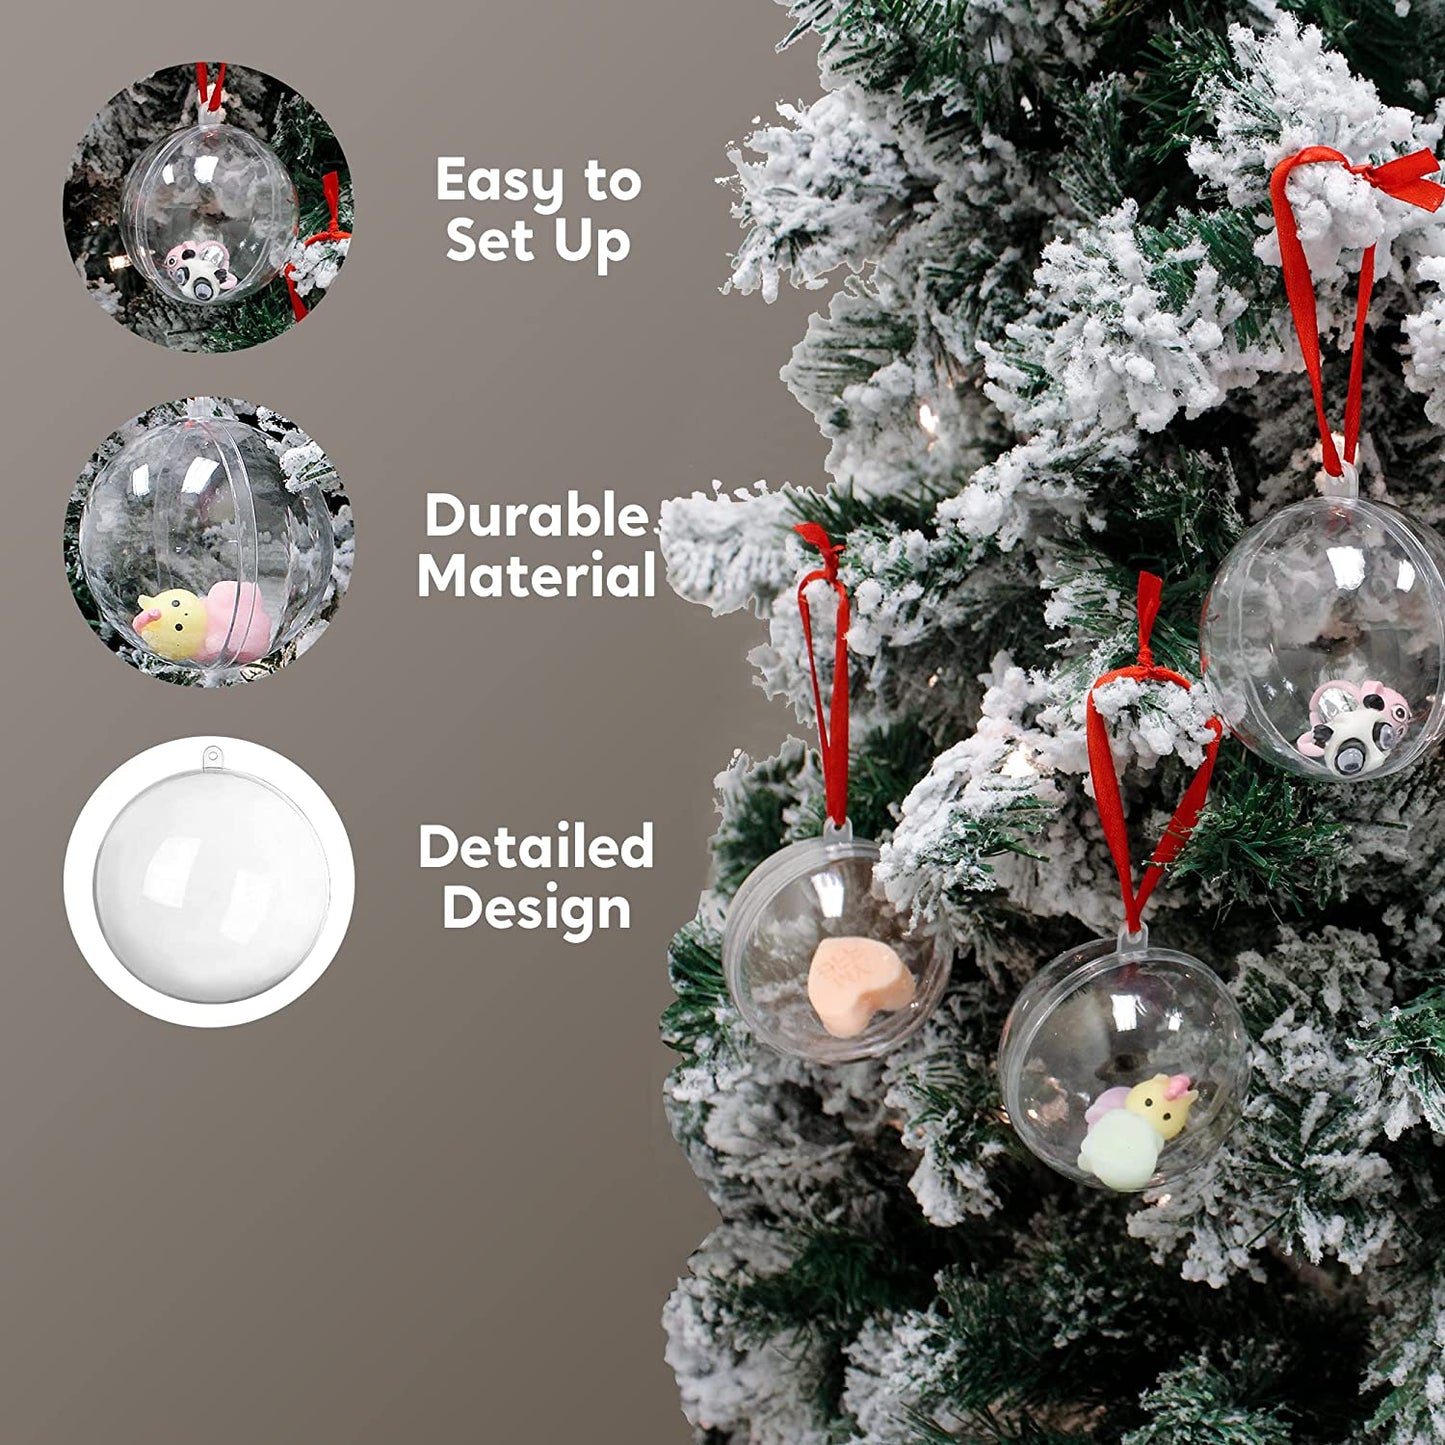 3.94in Plastic Fillable Christmas Ball Ornaments, 10 Pcs